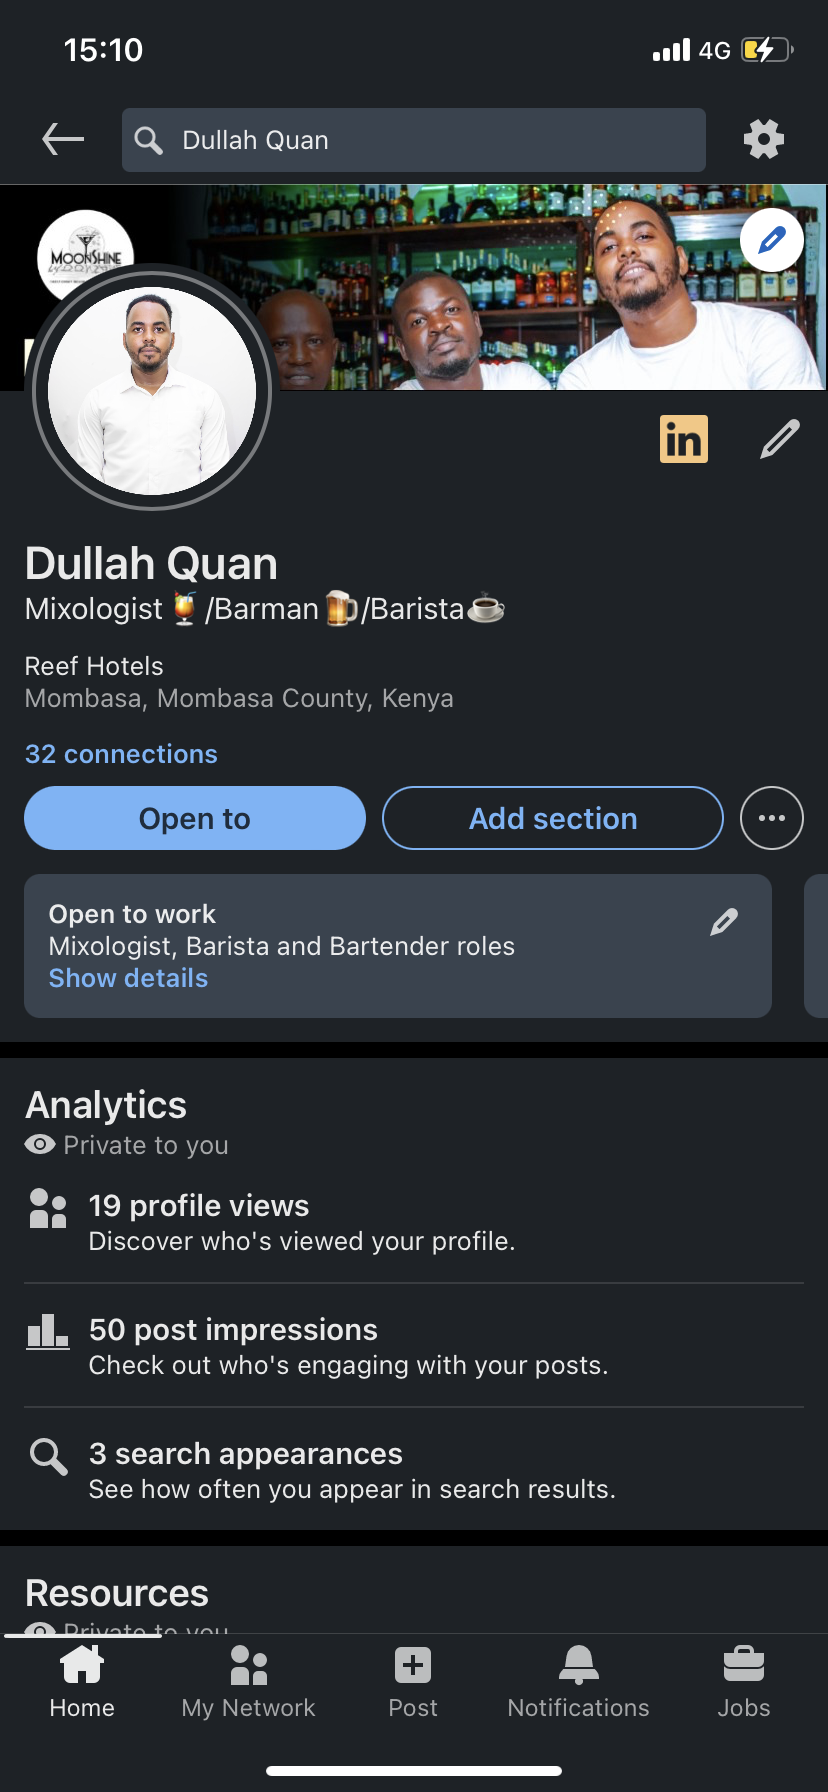 15:10 RIAs

& Q Dullah Quan $$

[2] LRT Vey
ET eal

 
   
 
 

Dullah Quan
Mixologist ® /Barman PERC)

Reef Hotels
Mombasa, Mombasa County, Kenya

32 connections

EE (oe 0

Open to work 2
Mixologist, Barista and Bartender roles
Show details

Analytics
© Private to you

22 19 profile views

Discover who's viewed your profile.

[7] EON TE Ty TICES
Check out who's engaging with your posts.

3 search appearances
See how often you appear in search results.

Resources
—MA\ Doiiatotn vin

a ry =

[aleInle] My Network [21 Notifications Nol HS